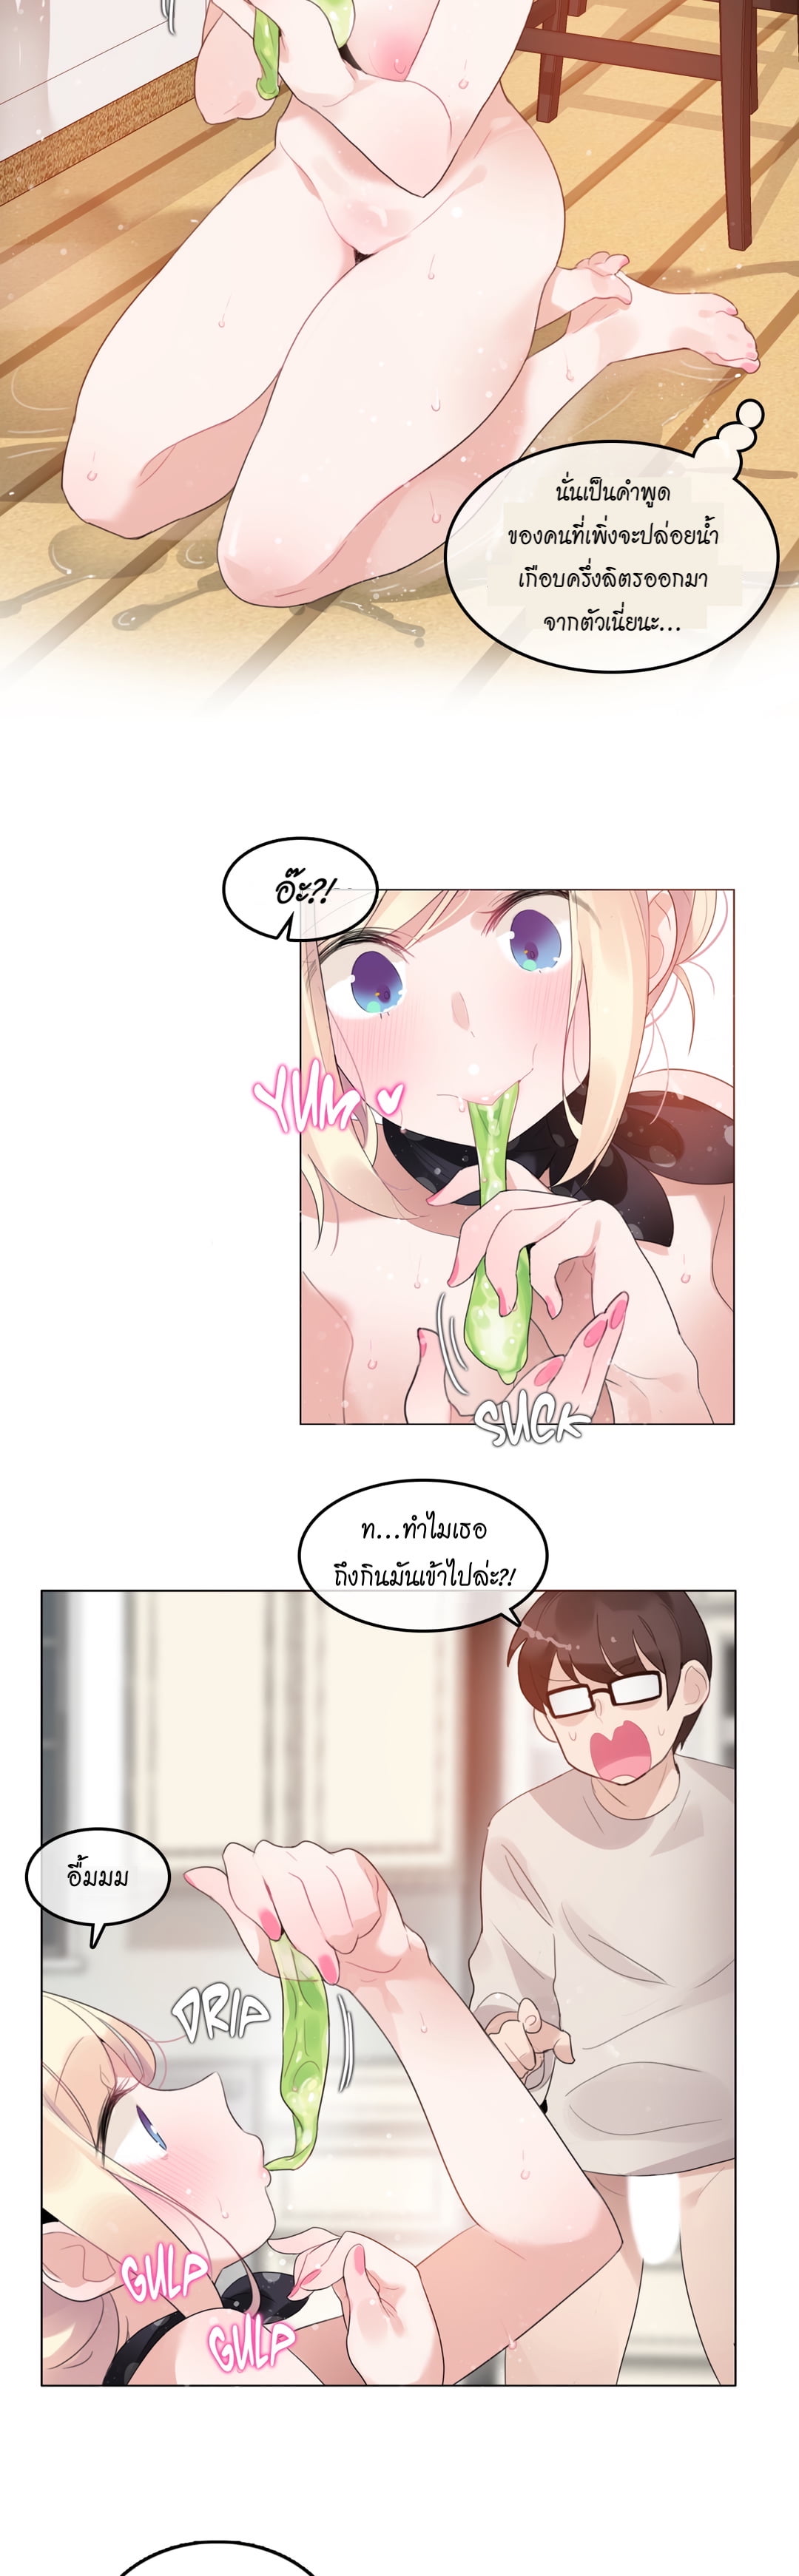 A Pervert’s Daily Life57 (15)